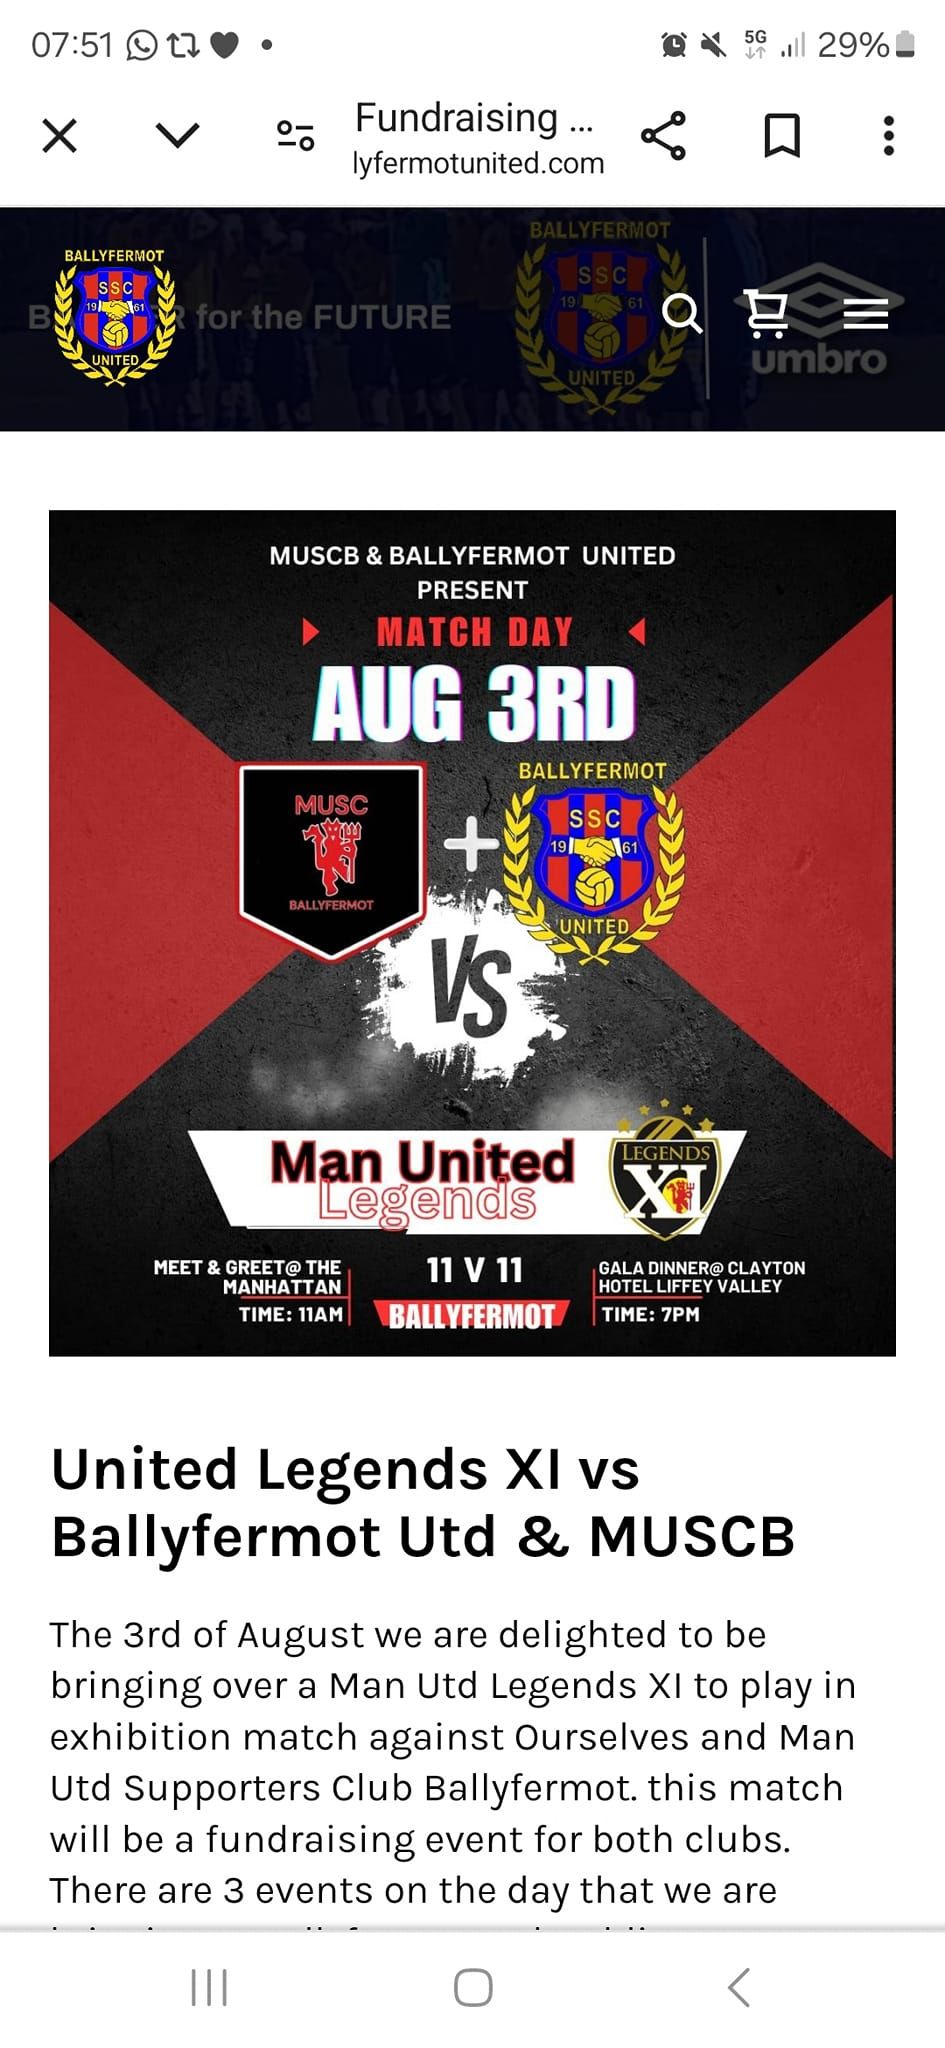 Fundraising Exhibition Match vs Manchester United  Legends